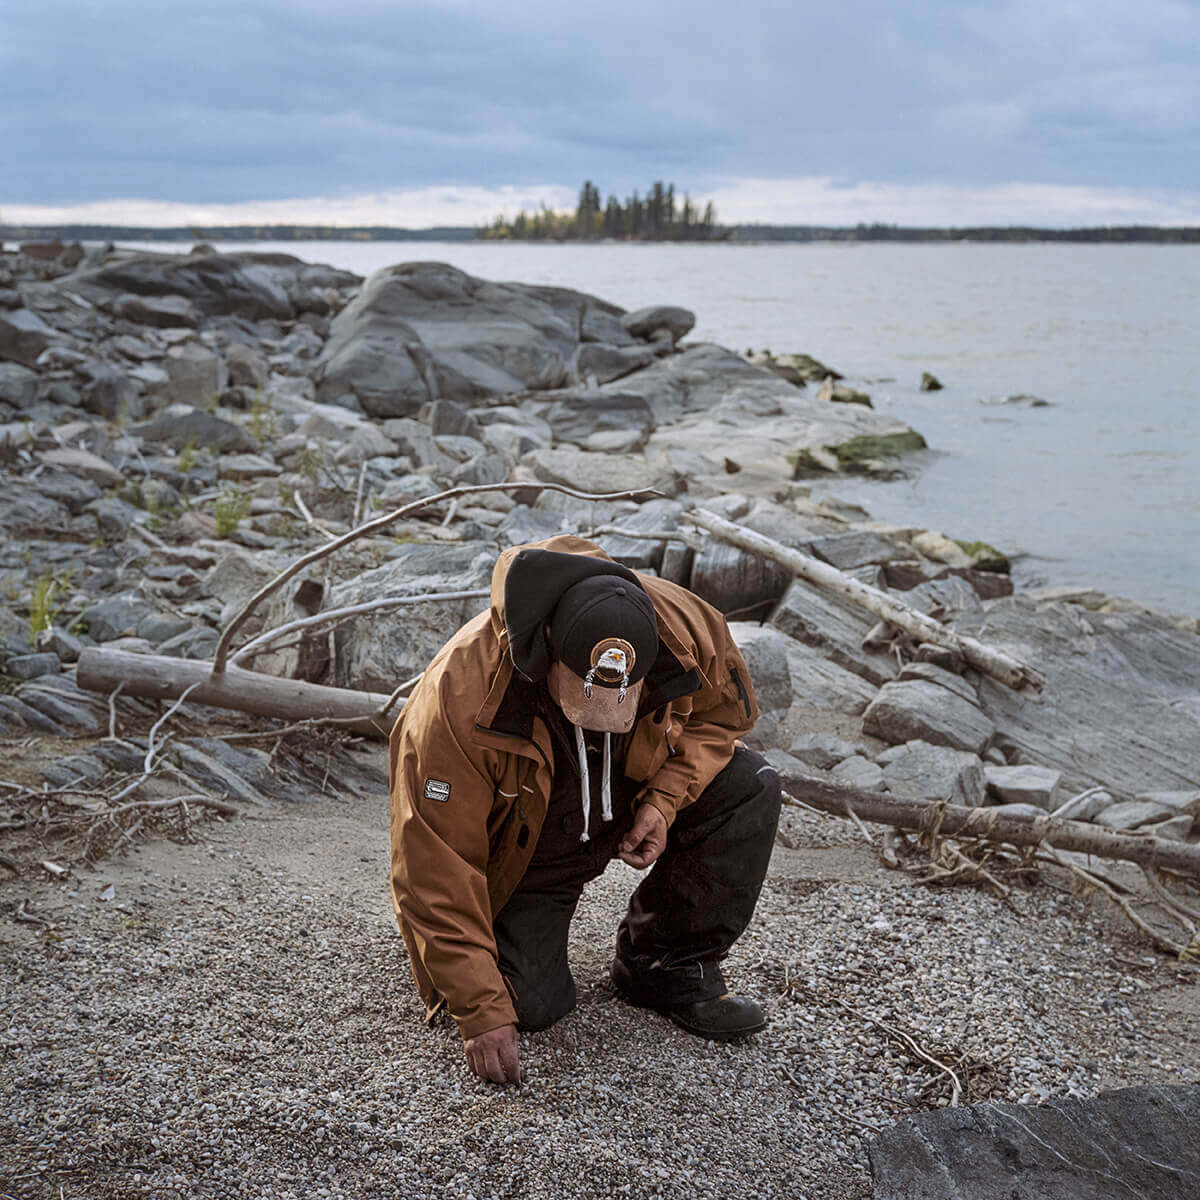 A photo of an Indigenous man kneeling on a shoreline.